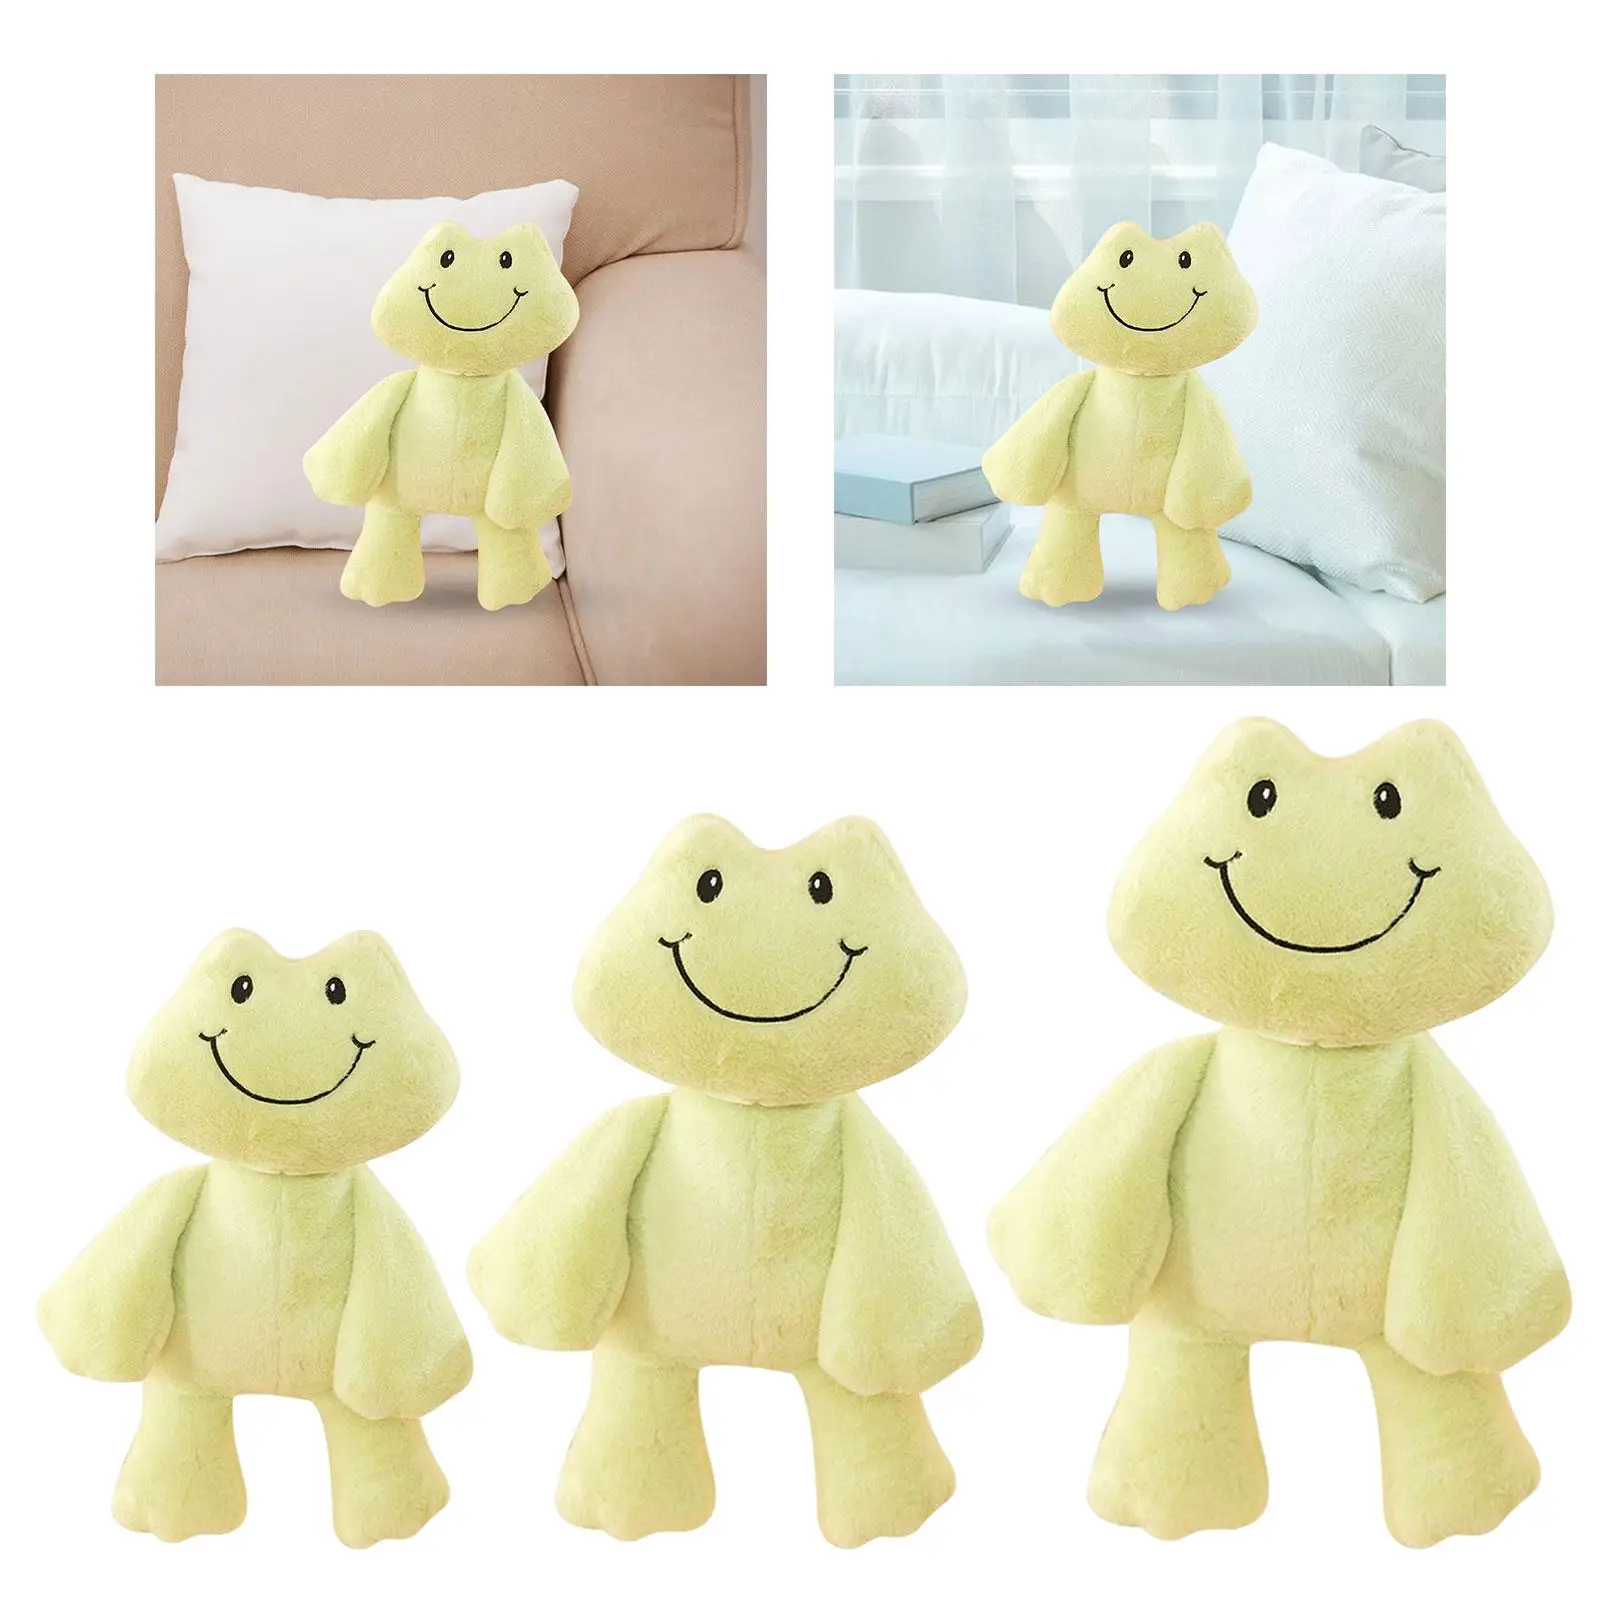 Soft Frog Plush Doll Pillow Stuffed Frog Plush Cushion Cute Frog Stuffed Animal for Party Toddlers Girlfriend Children Kids